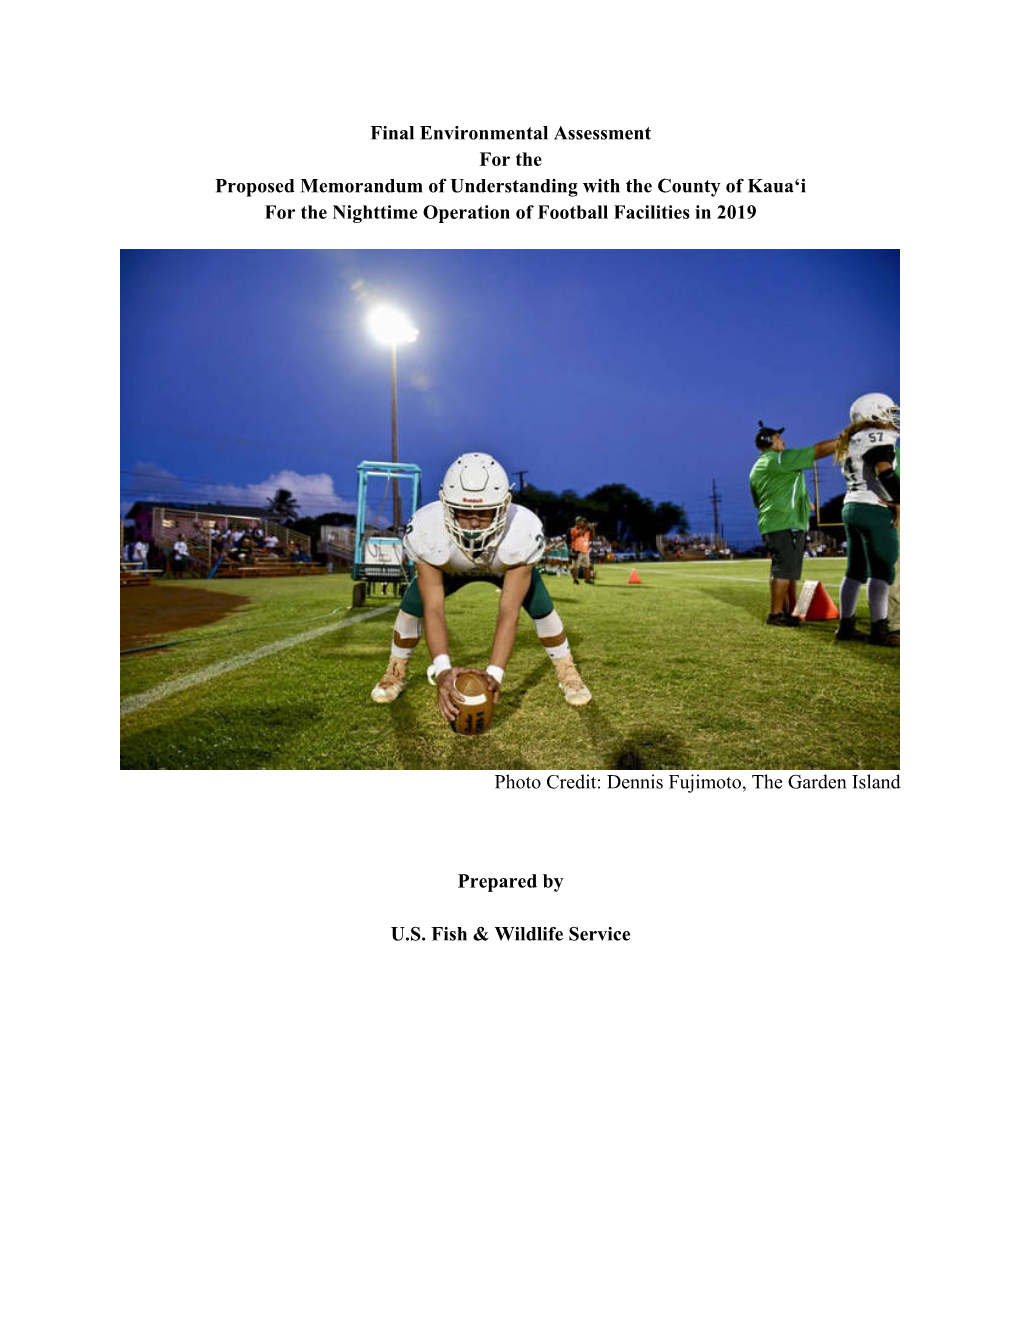 Final Environmental Assessment for the Proposed Memorandum of Understanding with the County of Kaua‘I for the Nighttime Operation of Football Facilities in 2019